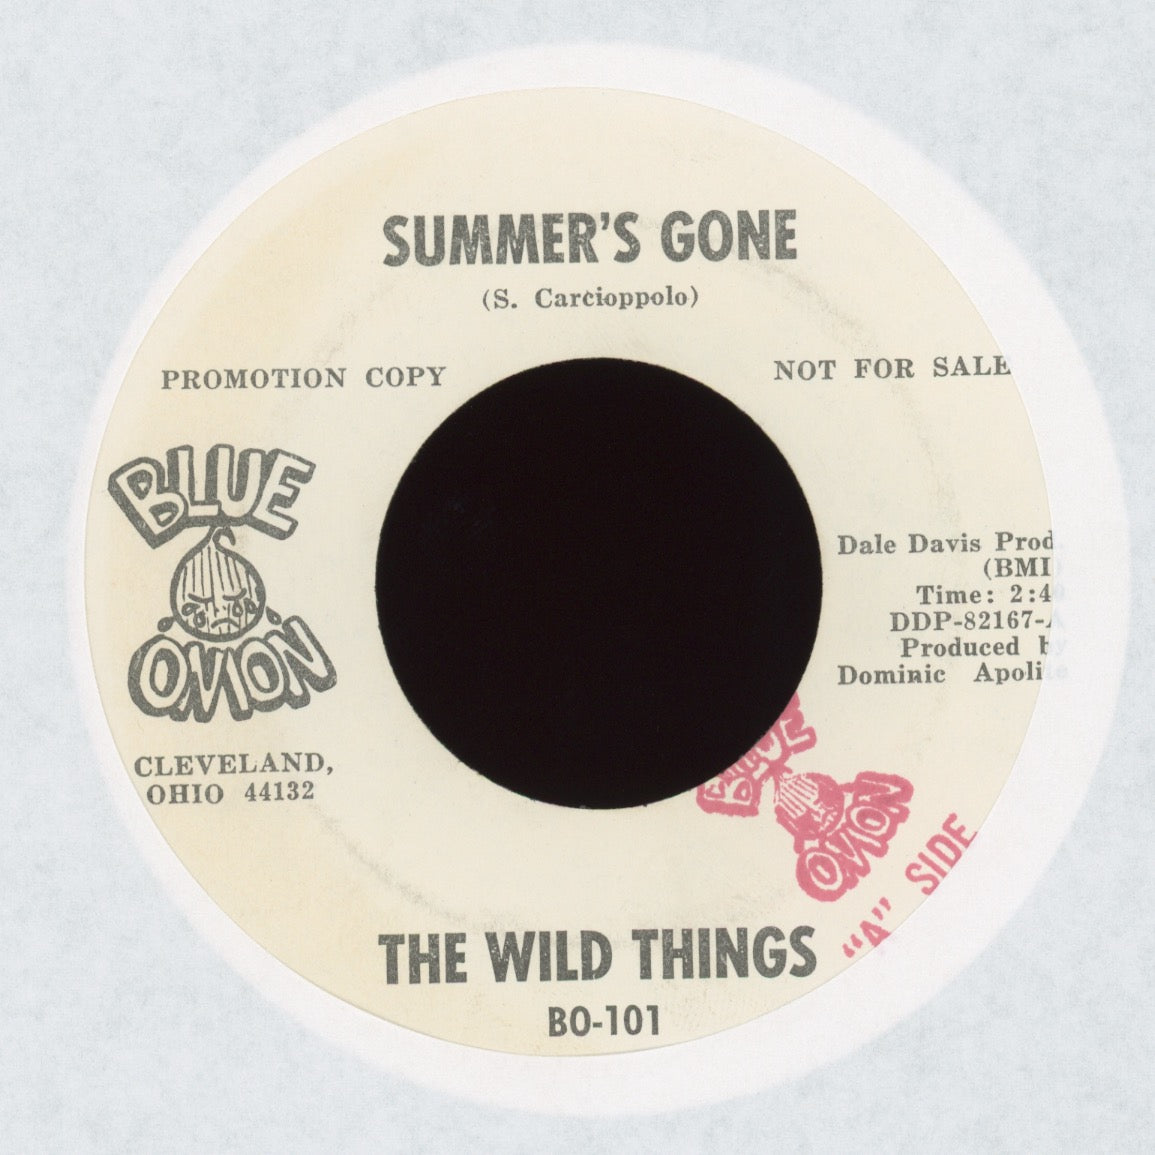 The Wild Things - Summer's Gone on Blue Onion Promo